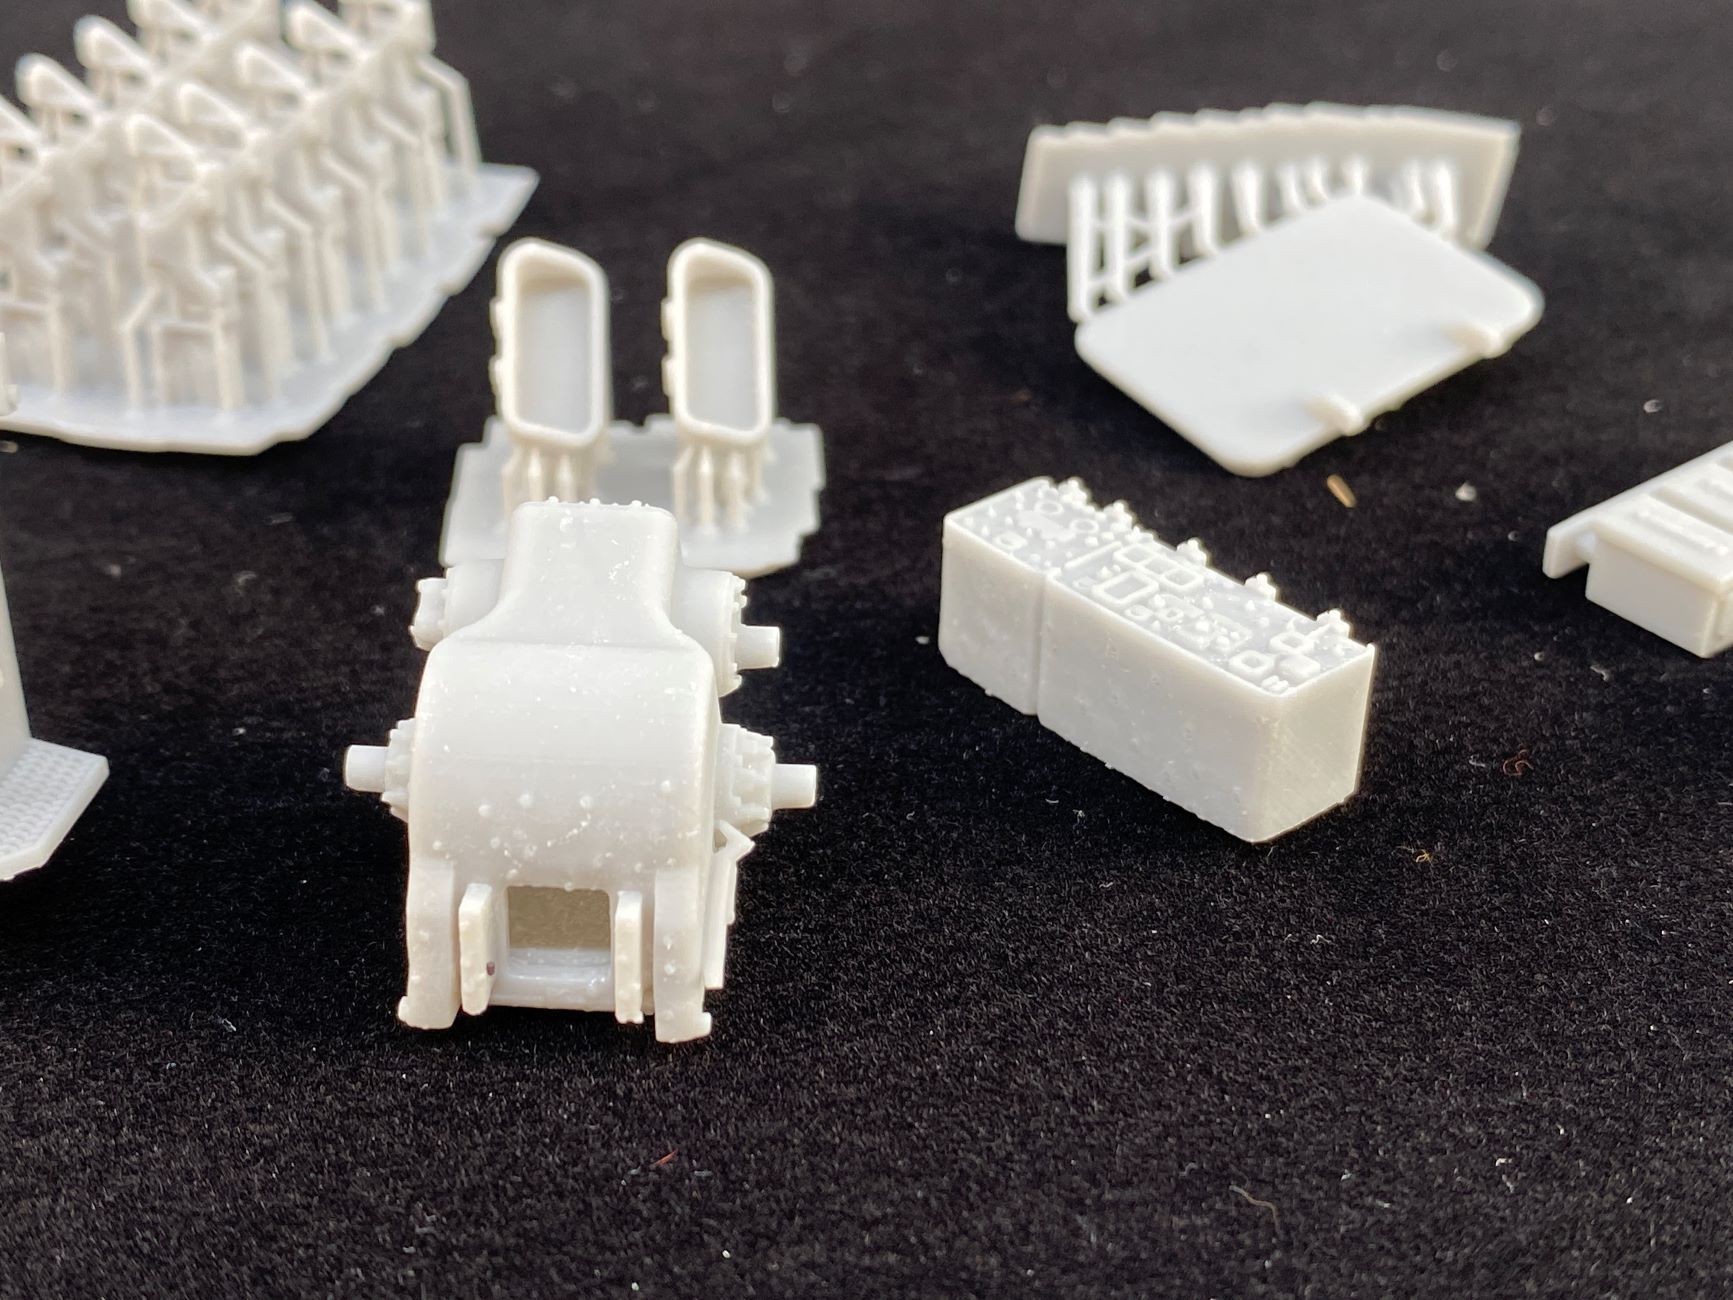 These sorts of "pimples" on 3D-printed parts are not unusual but sand off easily.